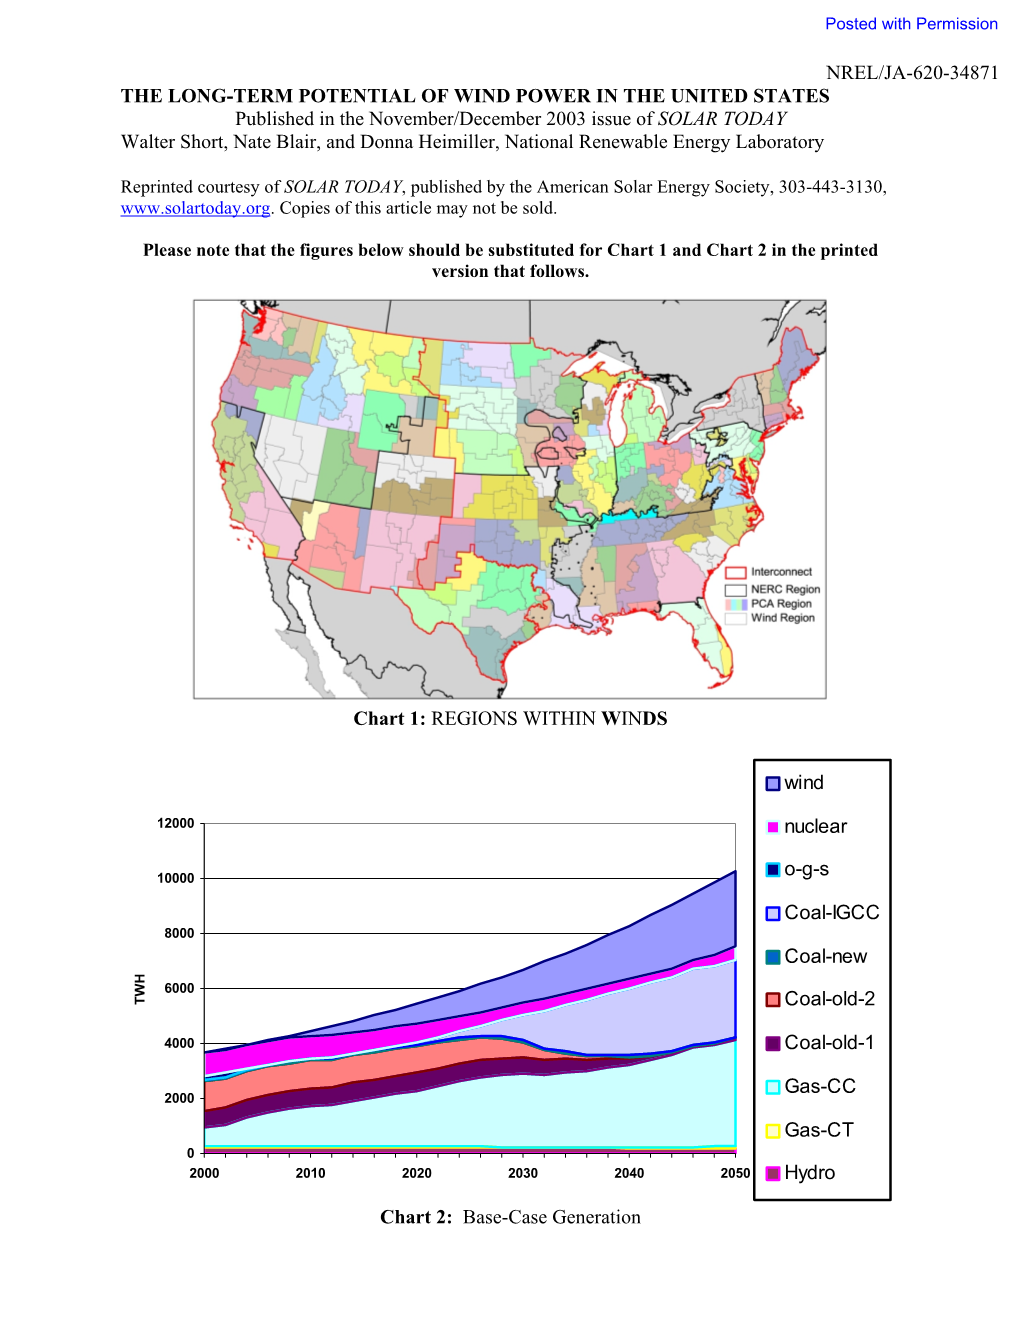 Long-Term Potential of Wind Power in the United States